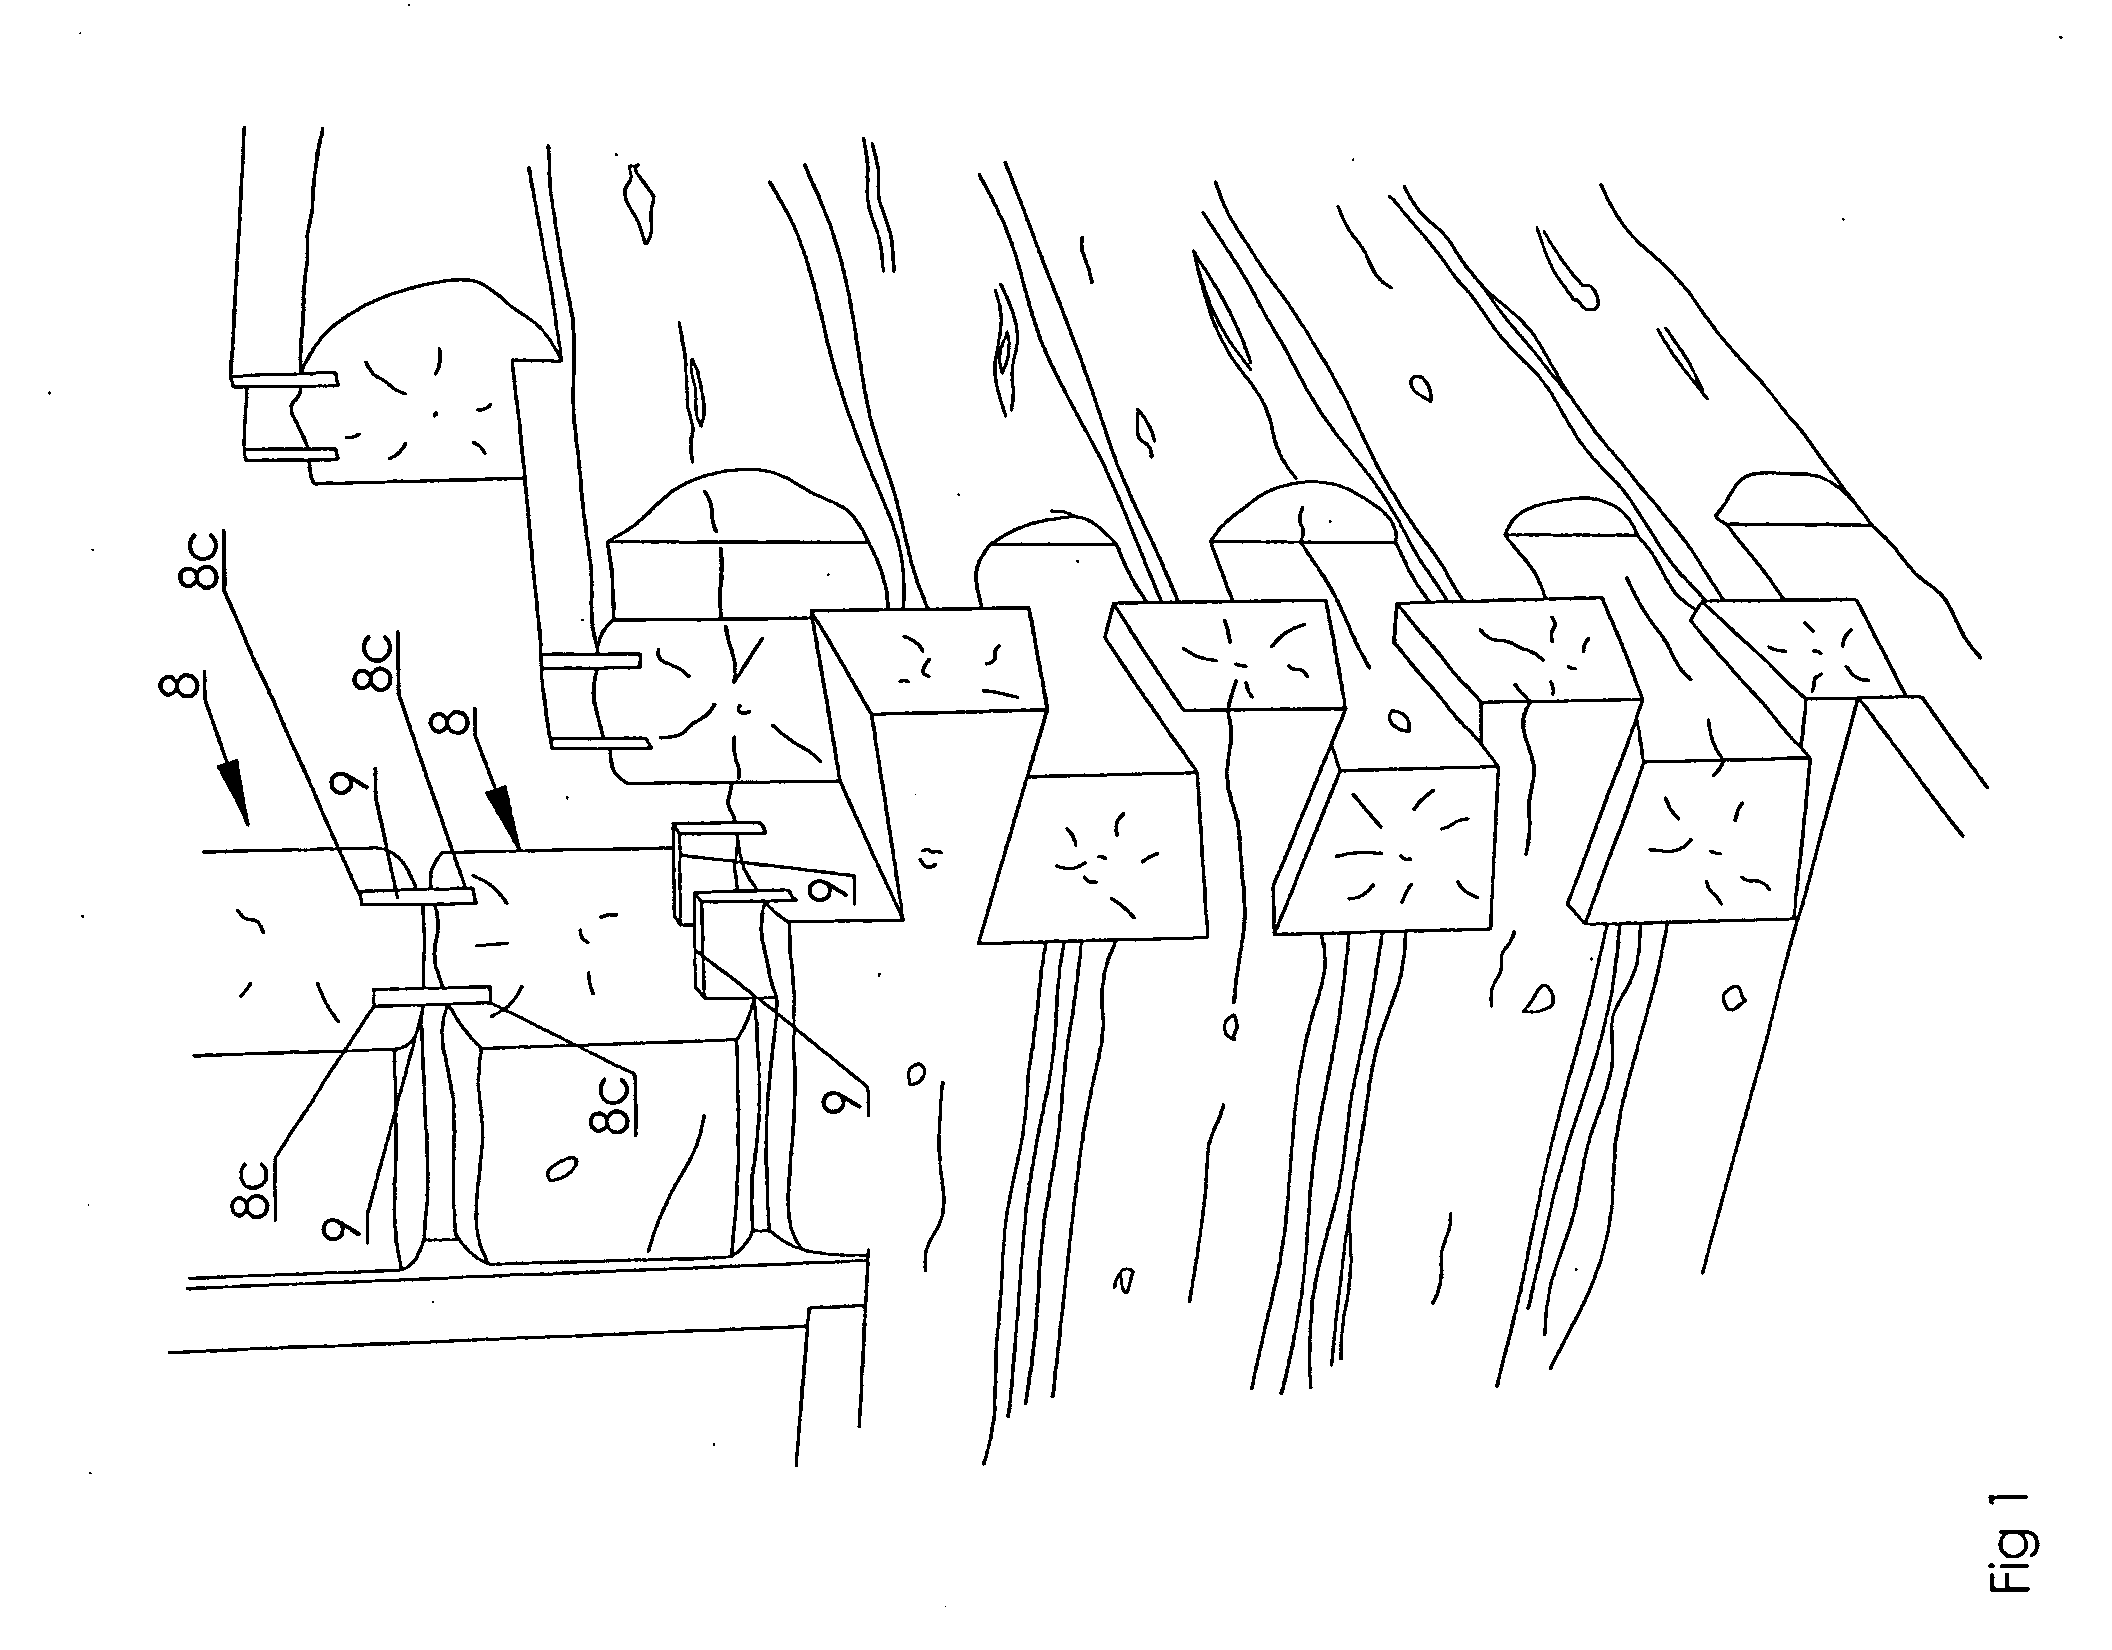 Method and apparatus for profiling a log for use in building timber or log homes